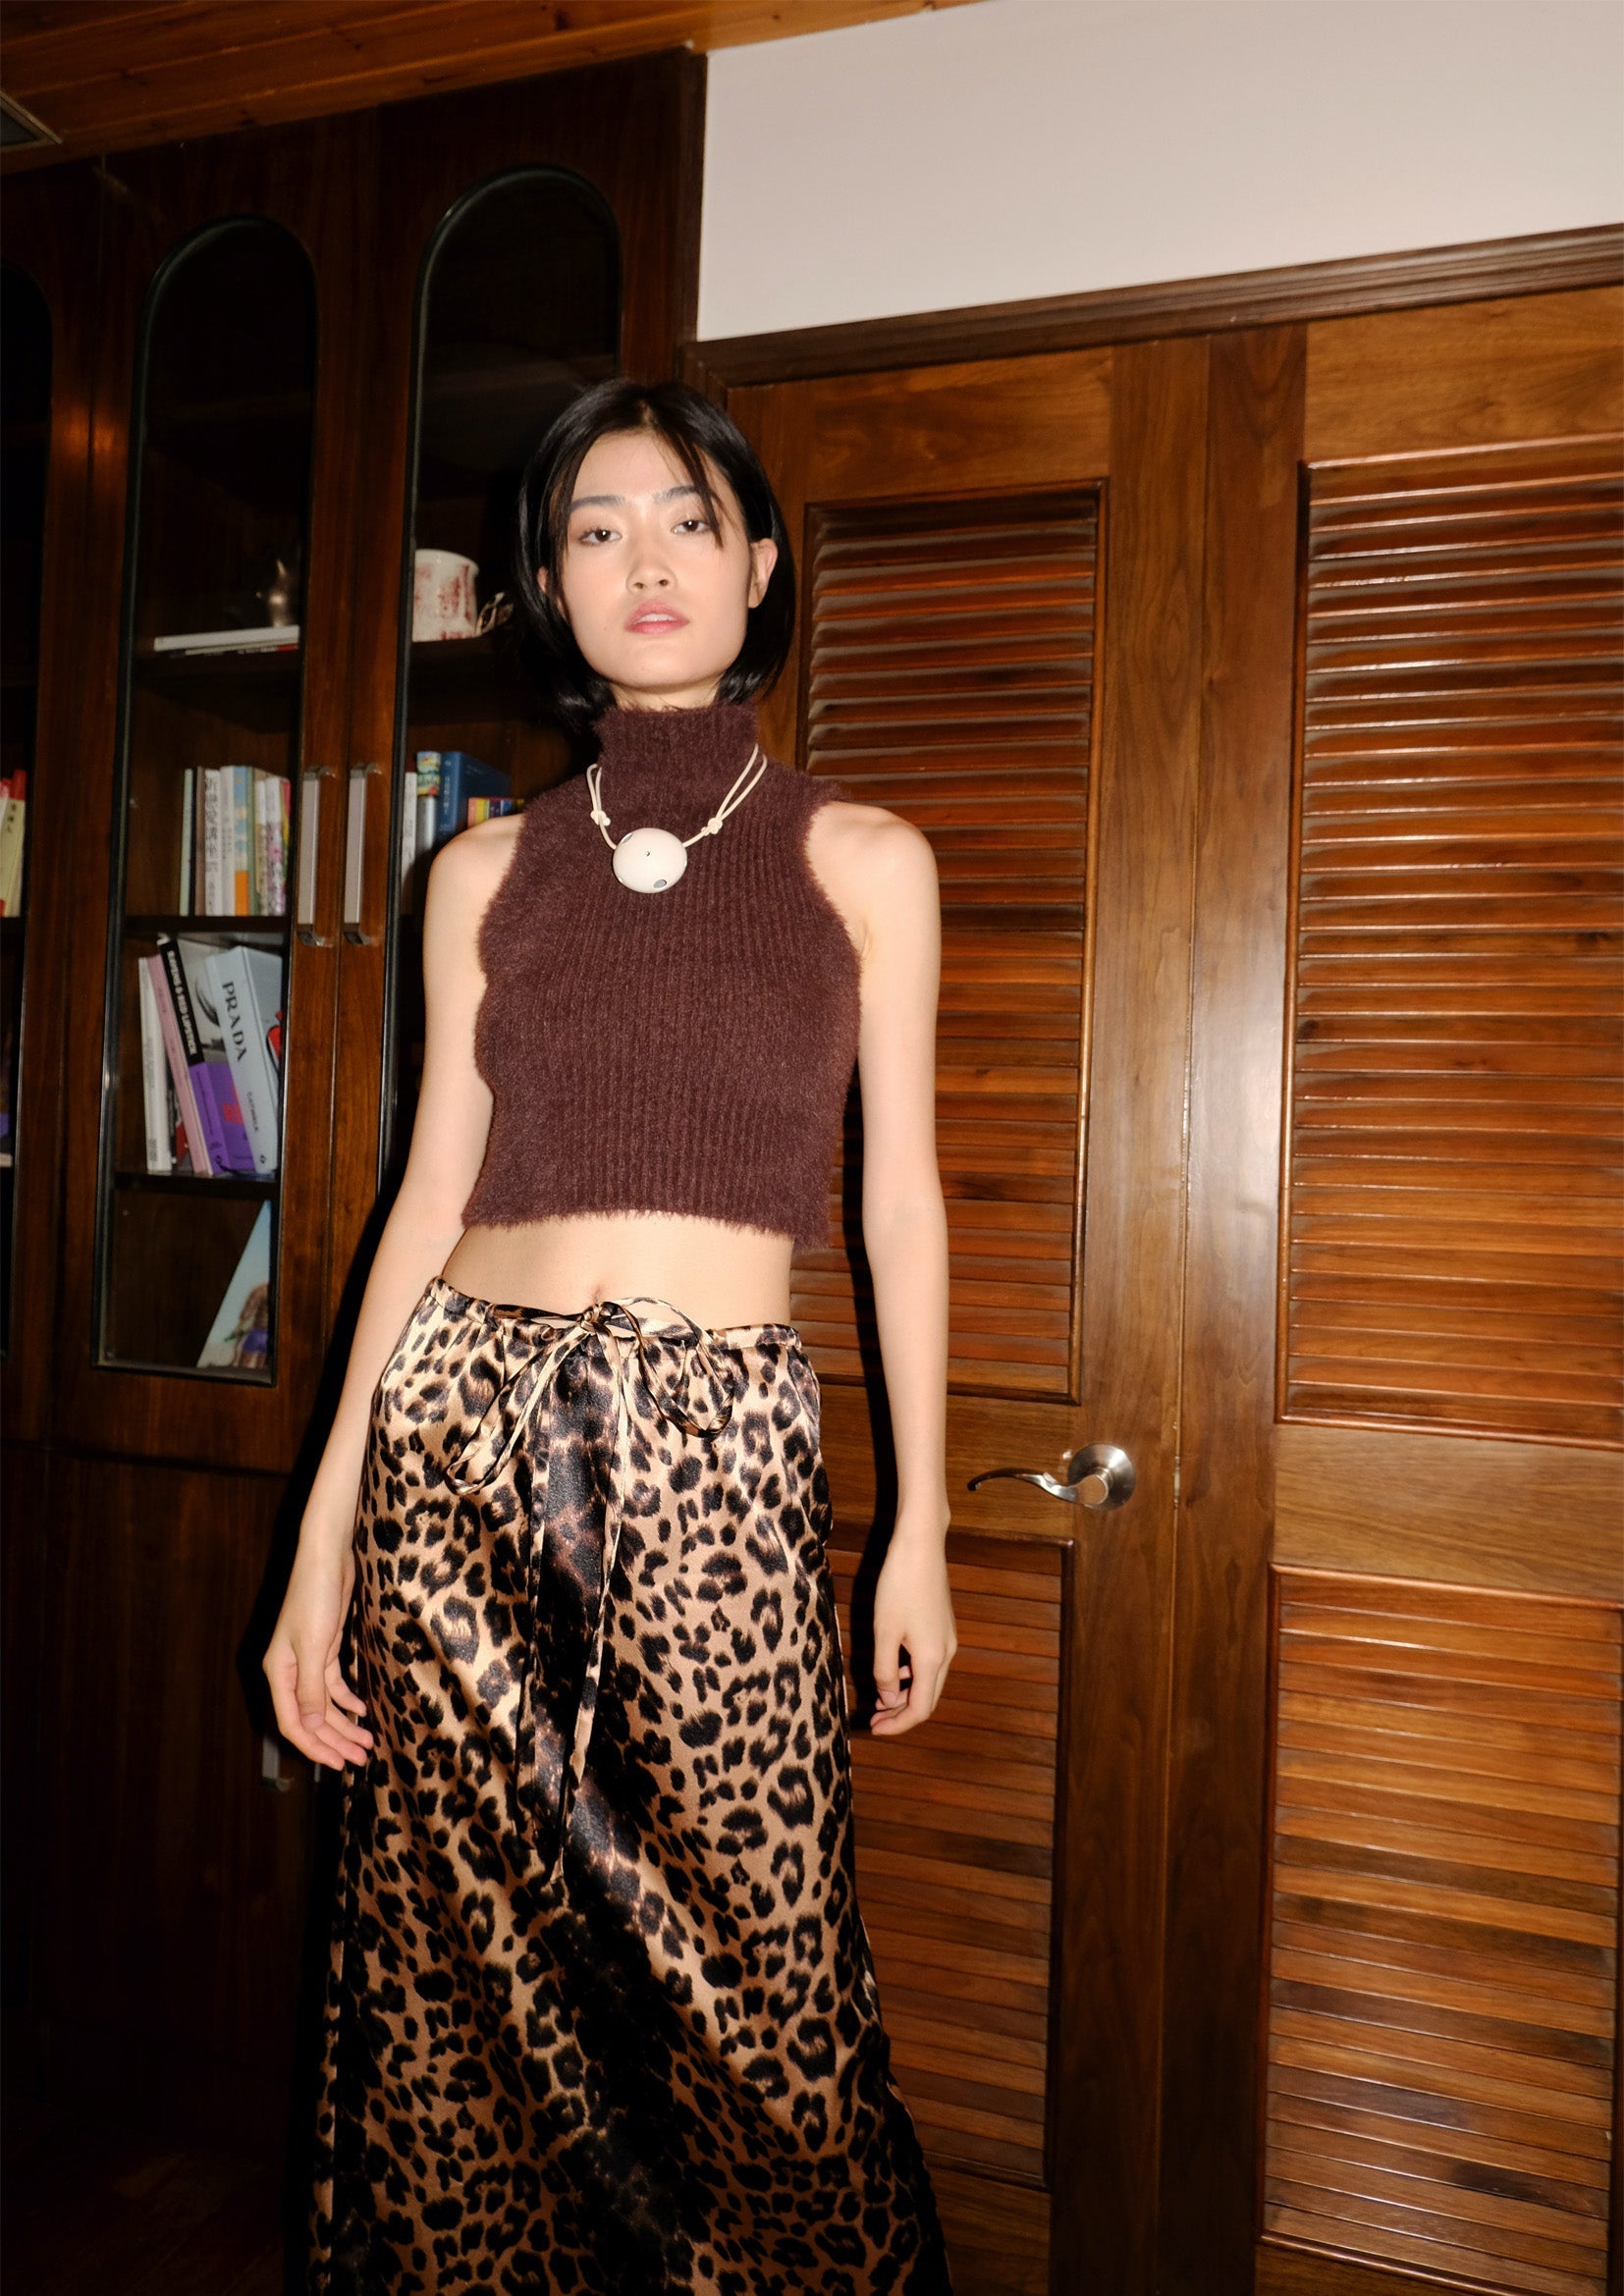 Fluffy knit tank crop top in chocolate